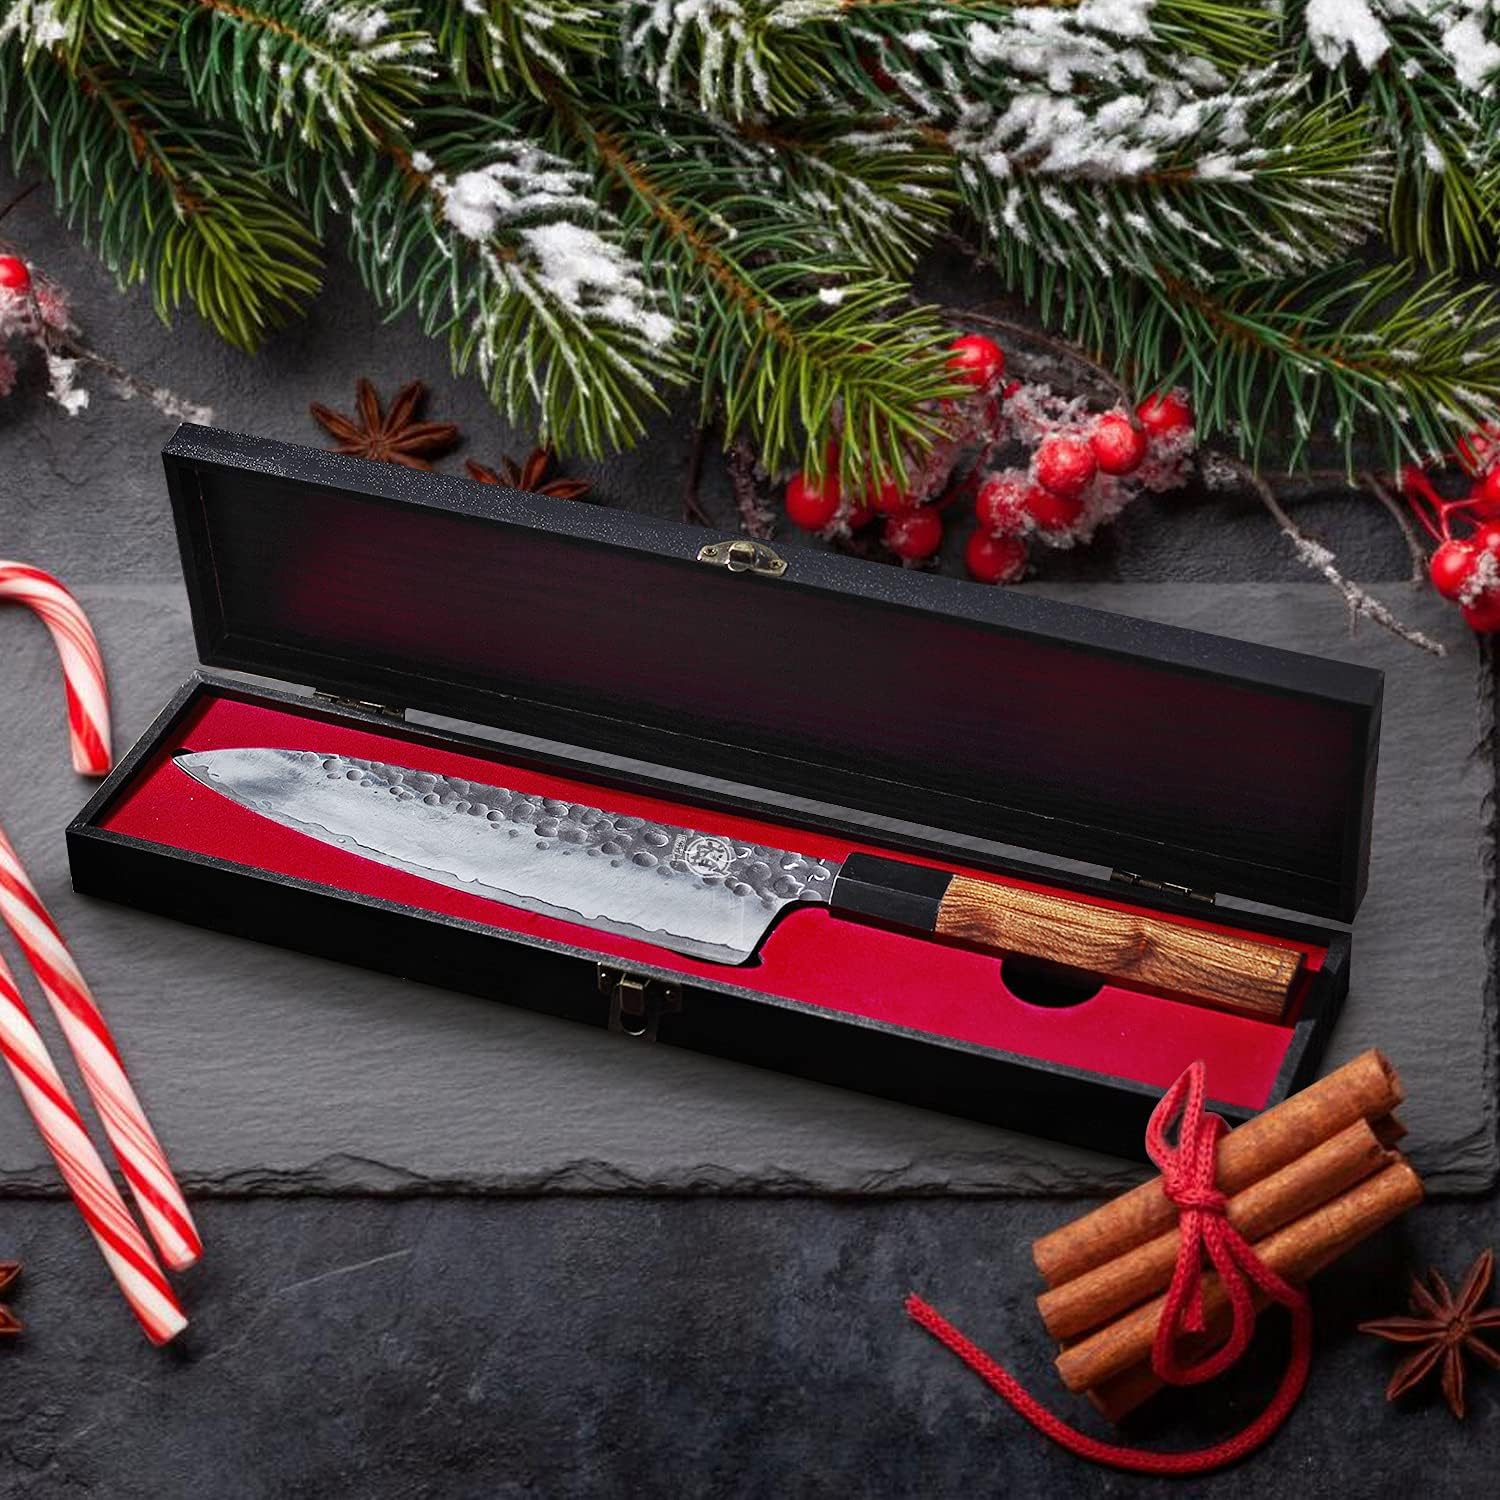 SHAN ZU Japanese Chef Knife 8 Inch, 7 Layers 9CR18MOV High Carbon Steel  Professional Kitchen Knife Super Sharp Gyuto Knife, Kitchen Utility Chef  Knife